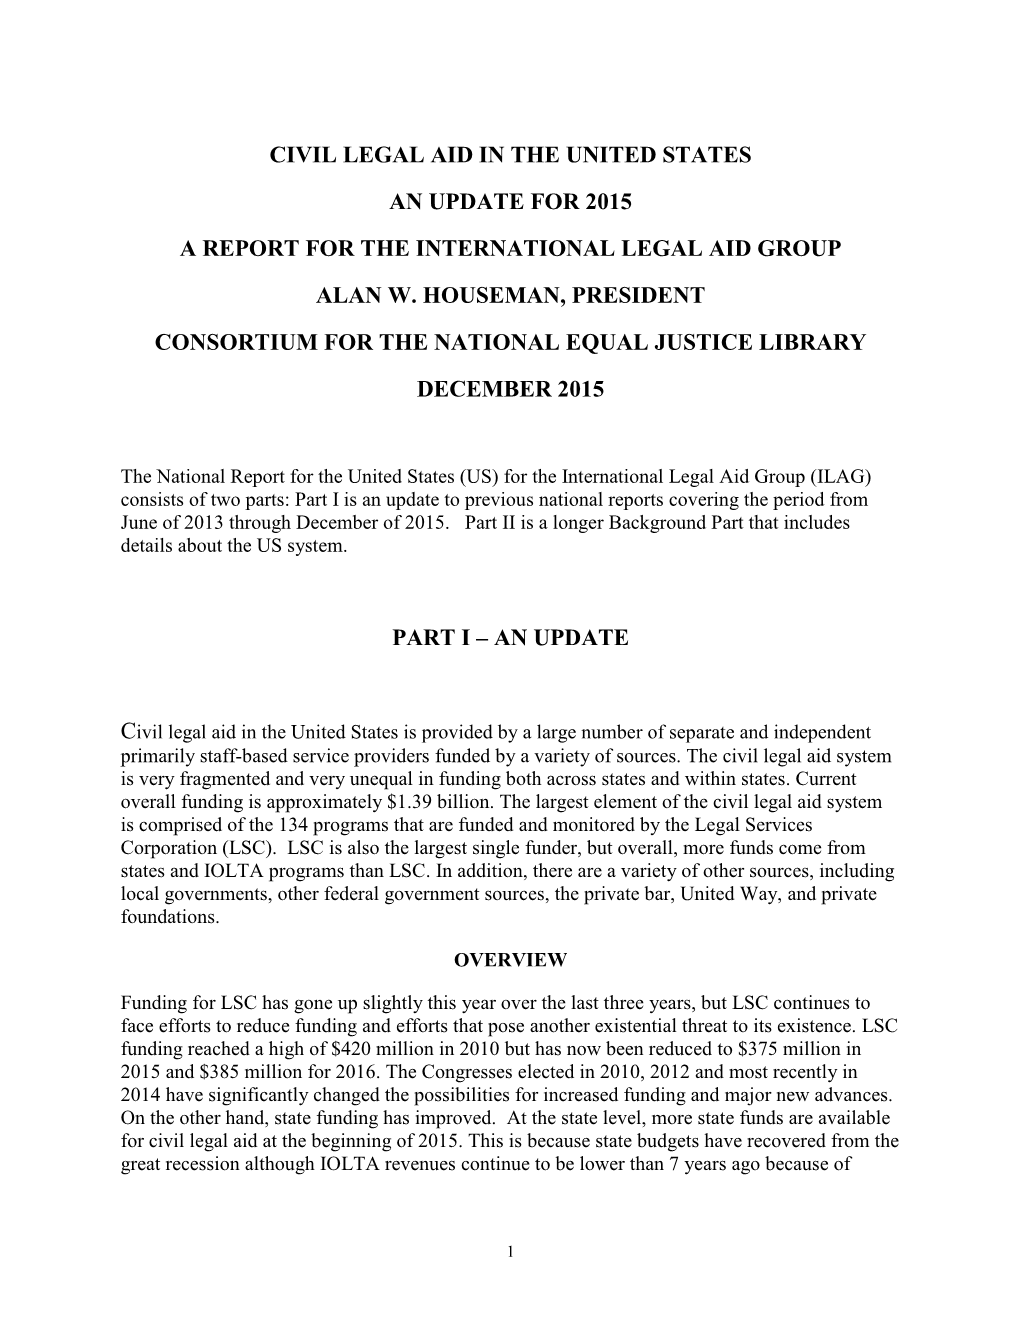 Civil Legal Aid in the United States an Update for 2015 A